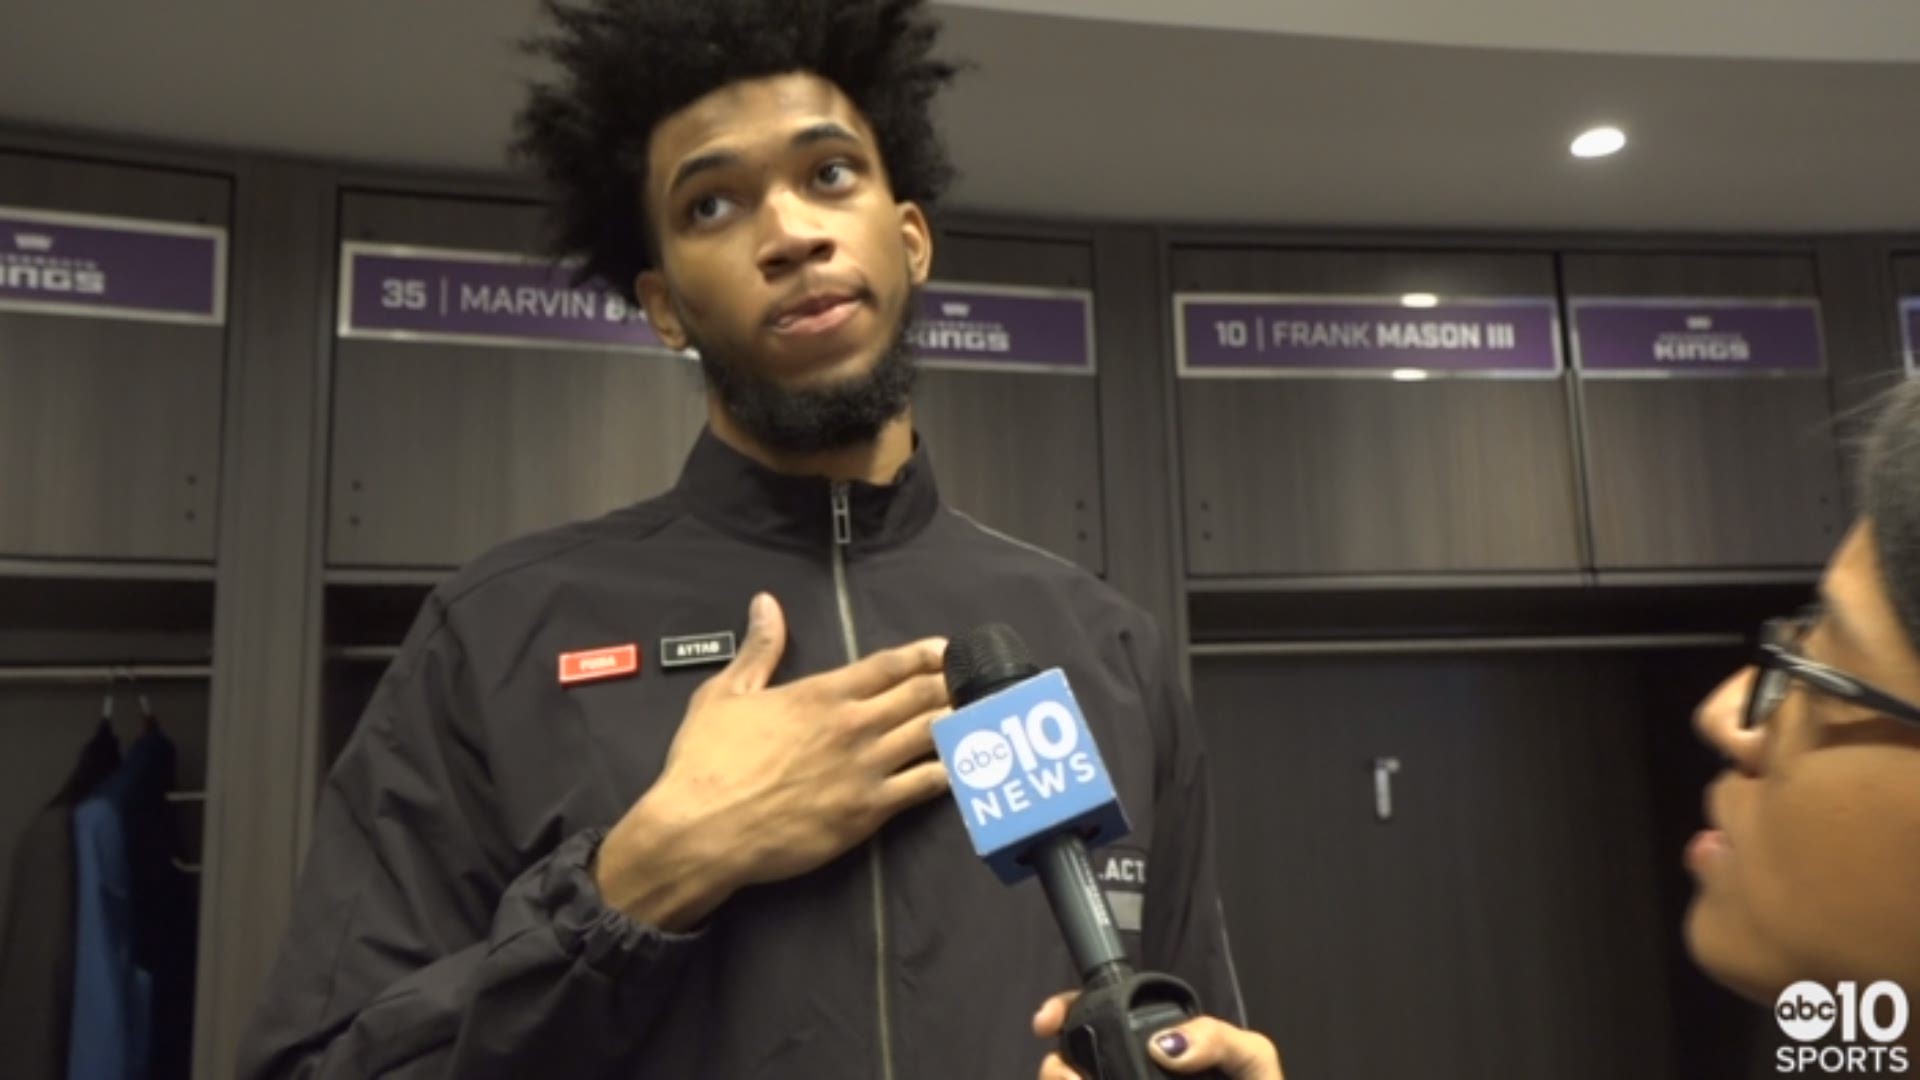 Kings rookie Marvin Bagley III talks about experiencing his first trade where he sees Justin Jackson, Iman Shumpert and Zach Randolph leave the team because of two trades executed by Sacramento on Wednesday.